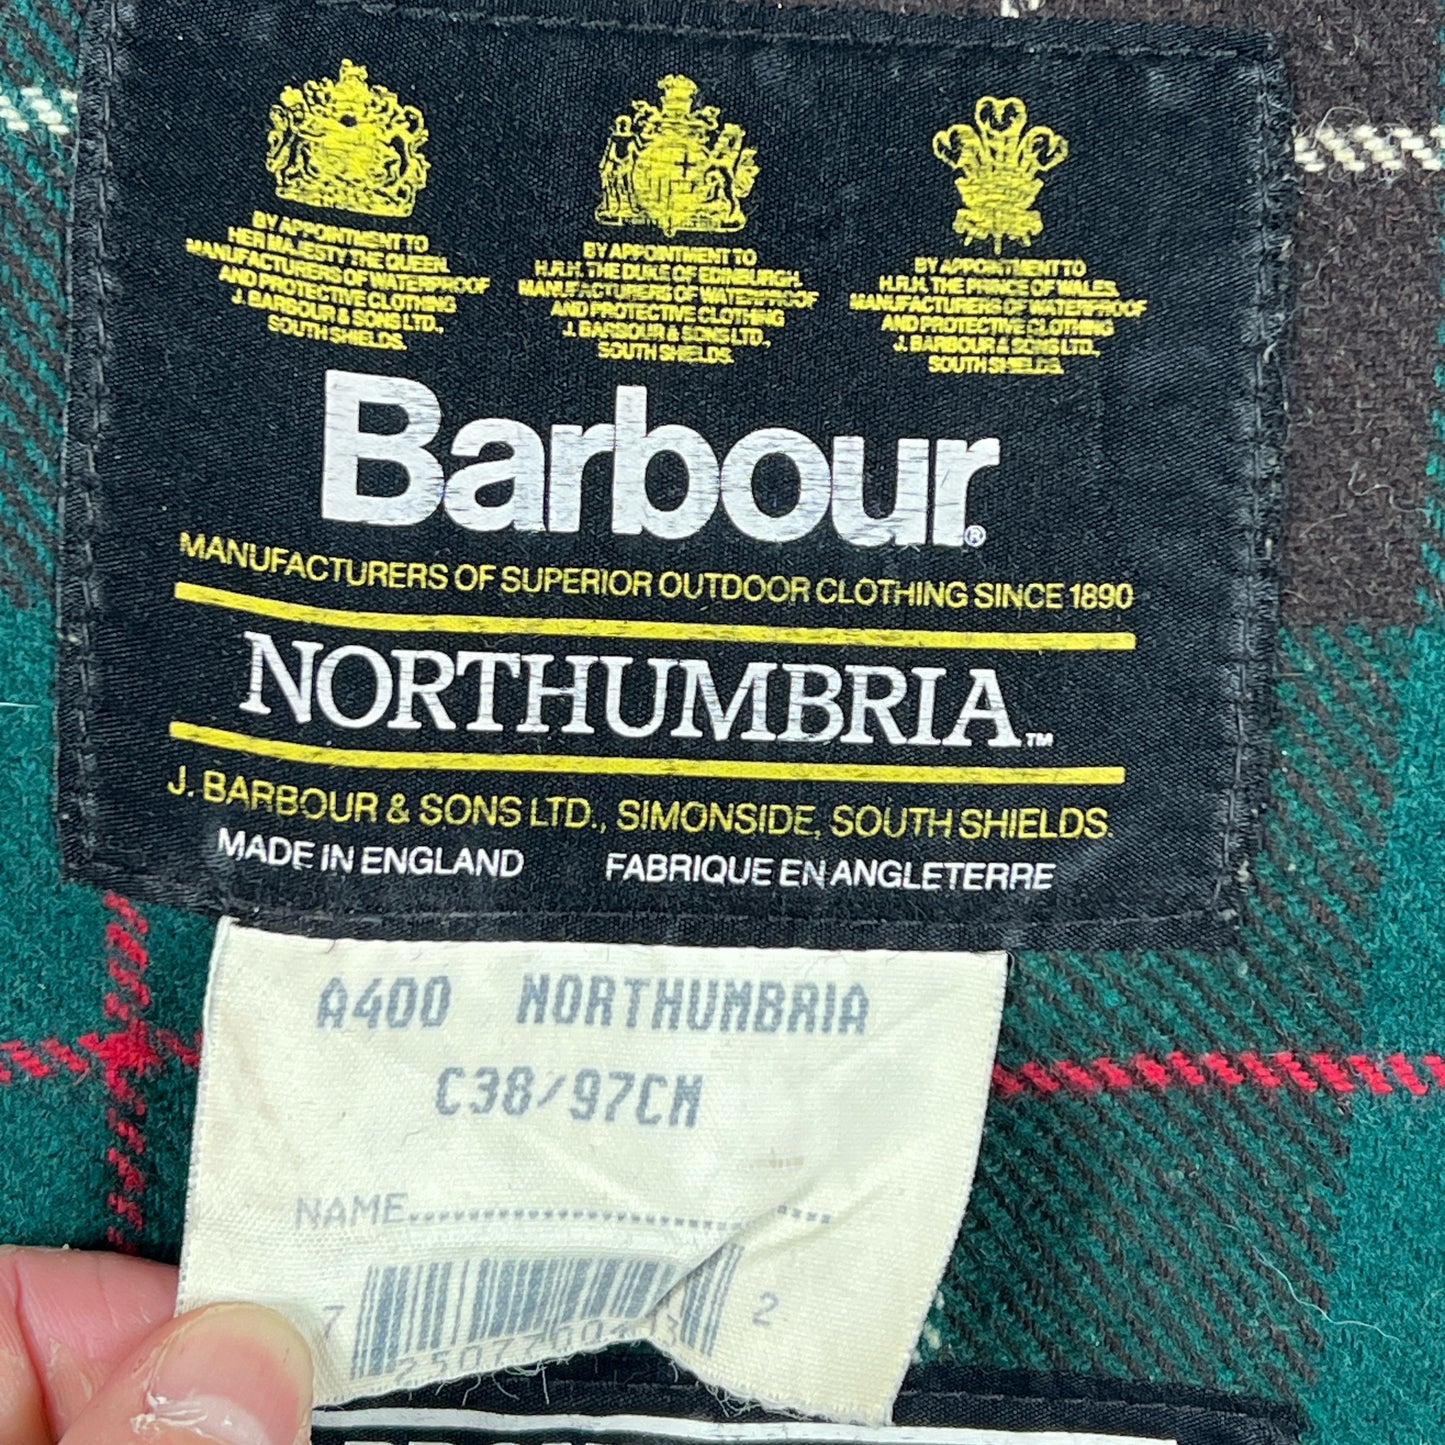 RARE Barbour Vintage Northumbria C38/97cm-Green Waxed Northumbria Jacket Small